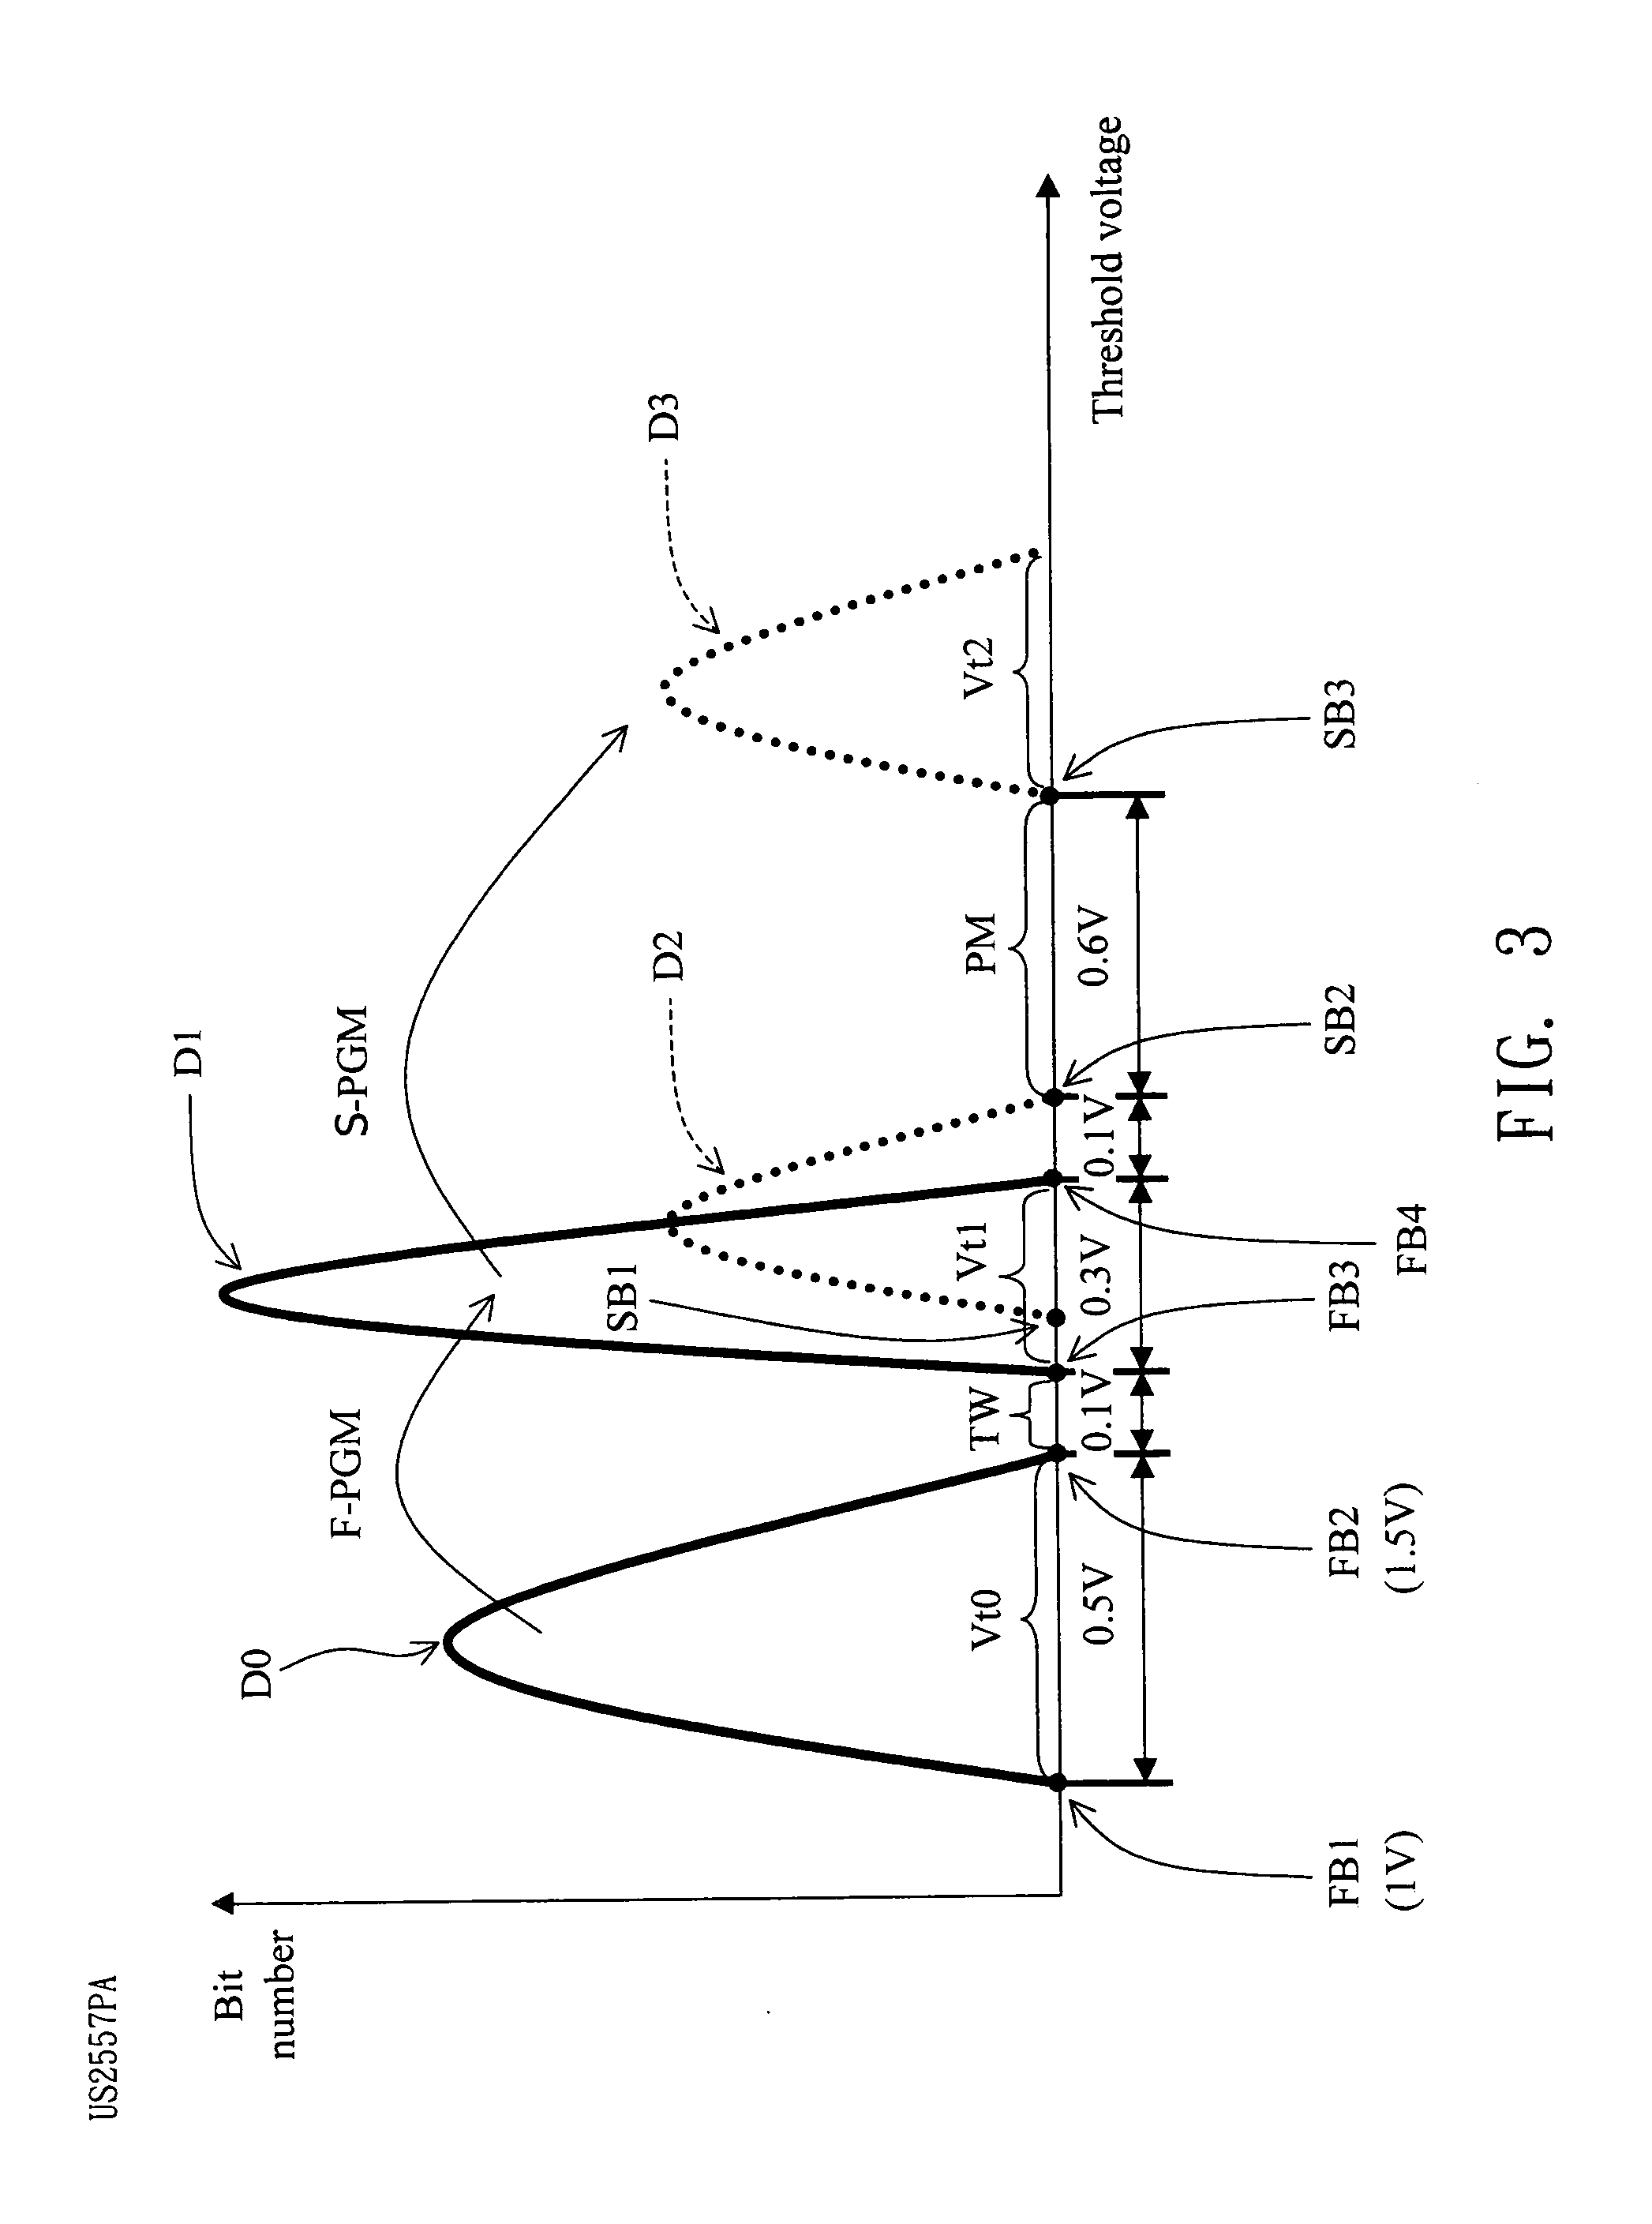 One-time-programmable (OTP) memory device and method for testing the same